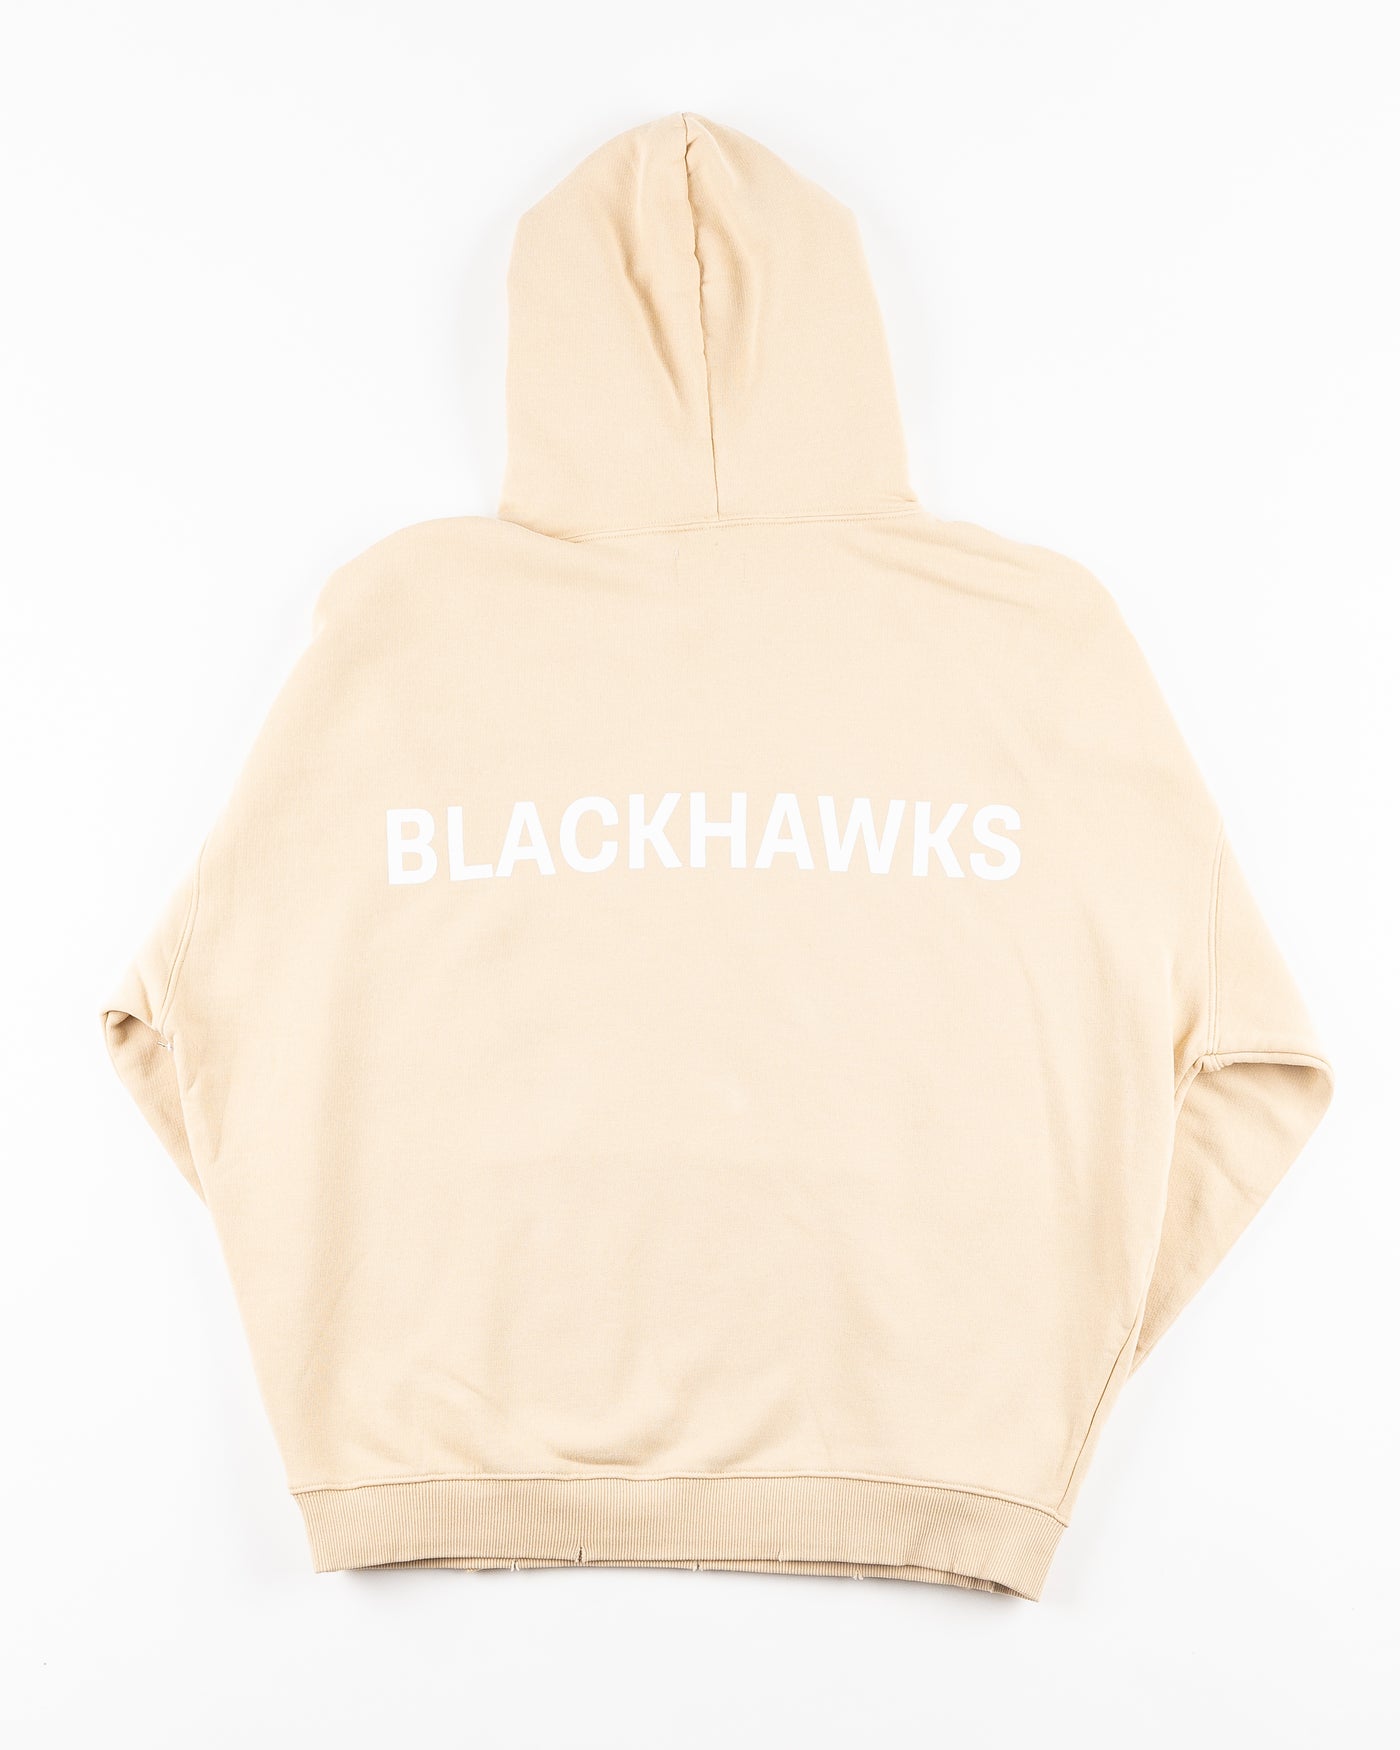 camel Line Change hoodie with Chicago Blackhawks wordmarks on front and back - back lay flat